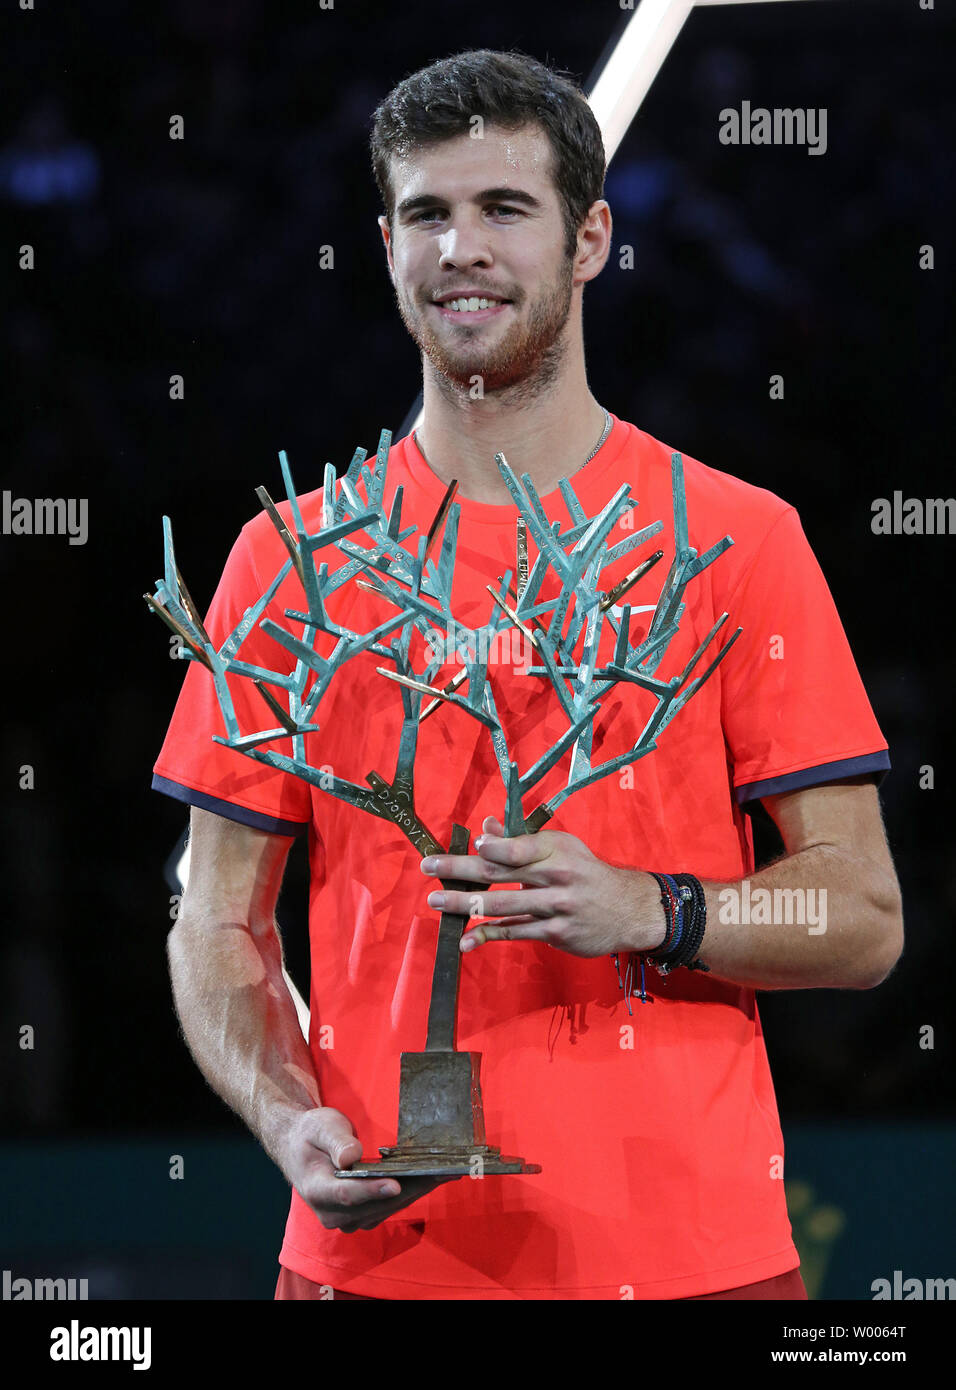 Russian Karen Khachanov holds the championship trophy after winning his  finals match against Novak Djokovic of Serbia at the Rolex Paris Masters  tennis in Paris on November 4, 2018. Khahchanov defeated Djokovic